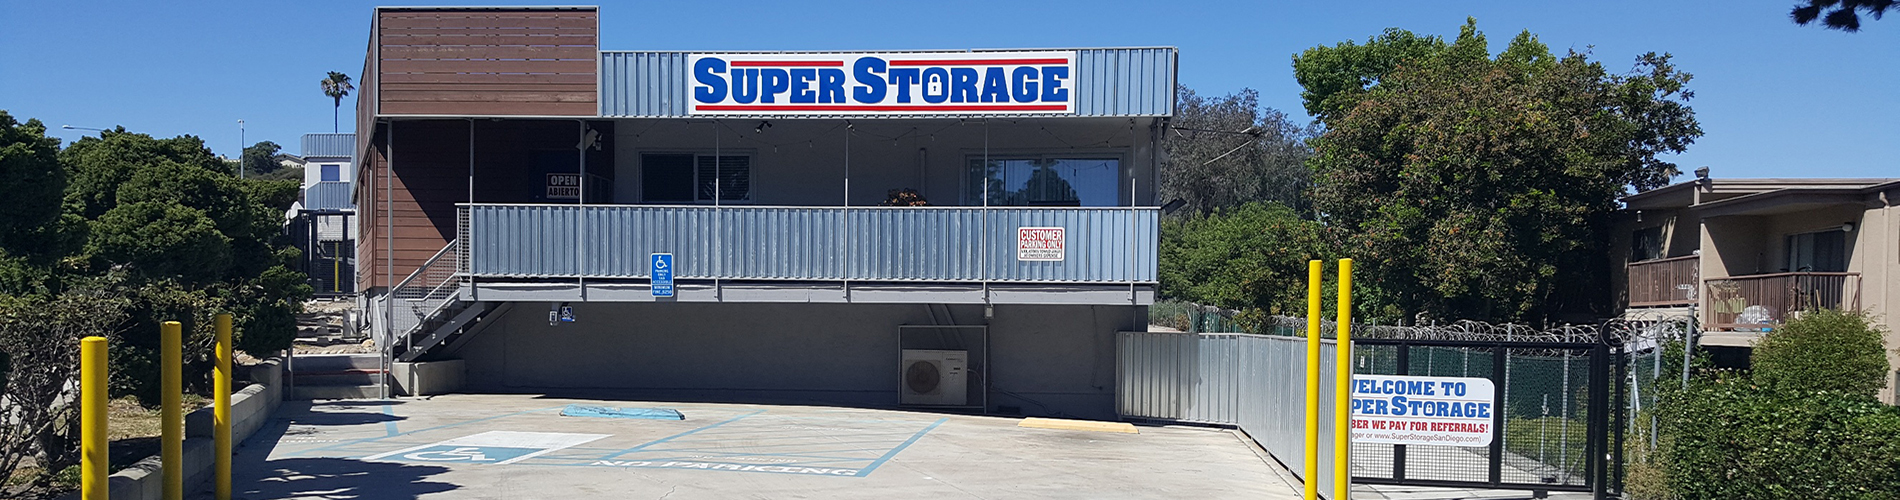 Rent your self storage today